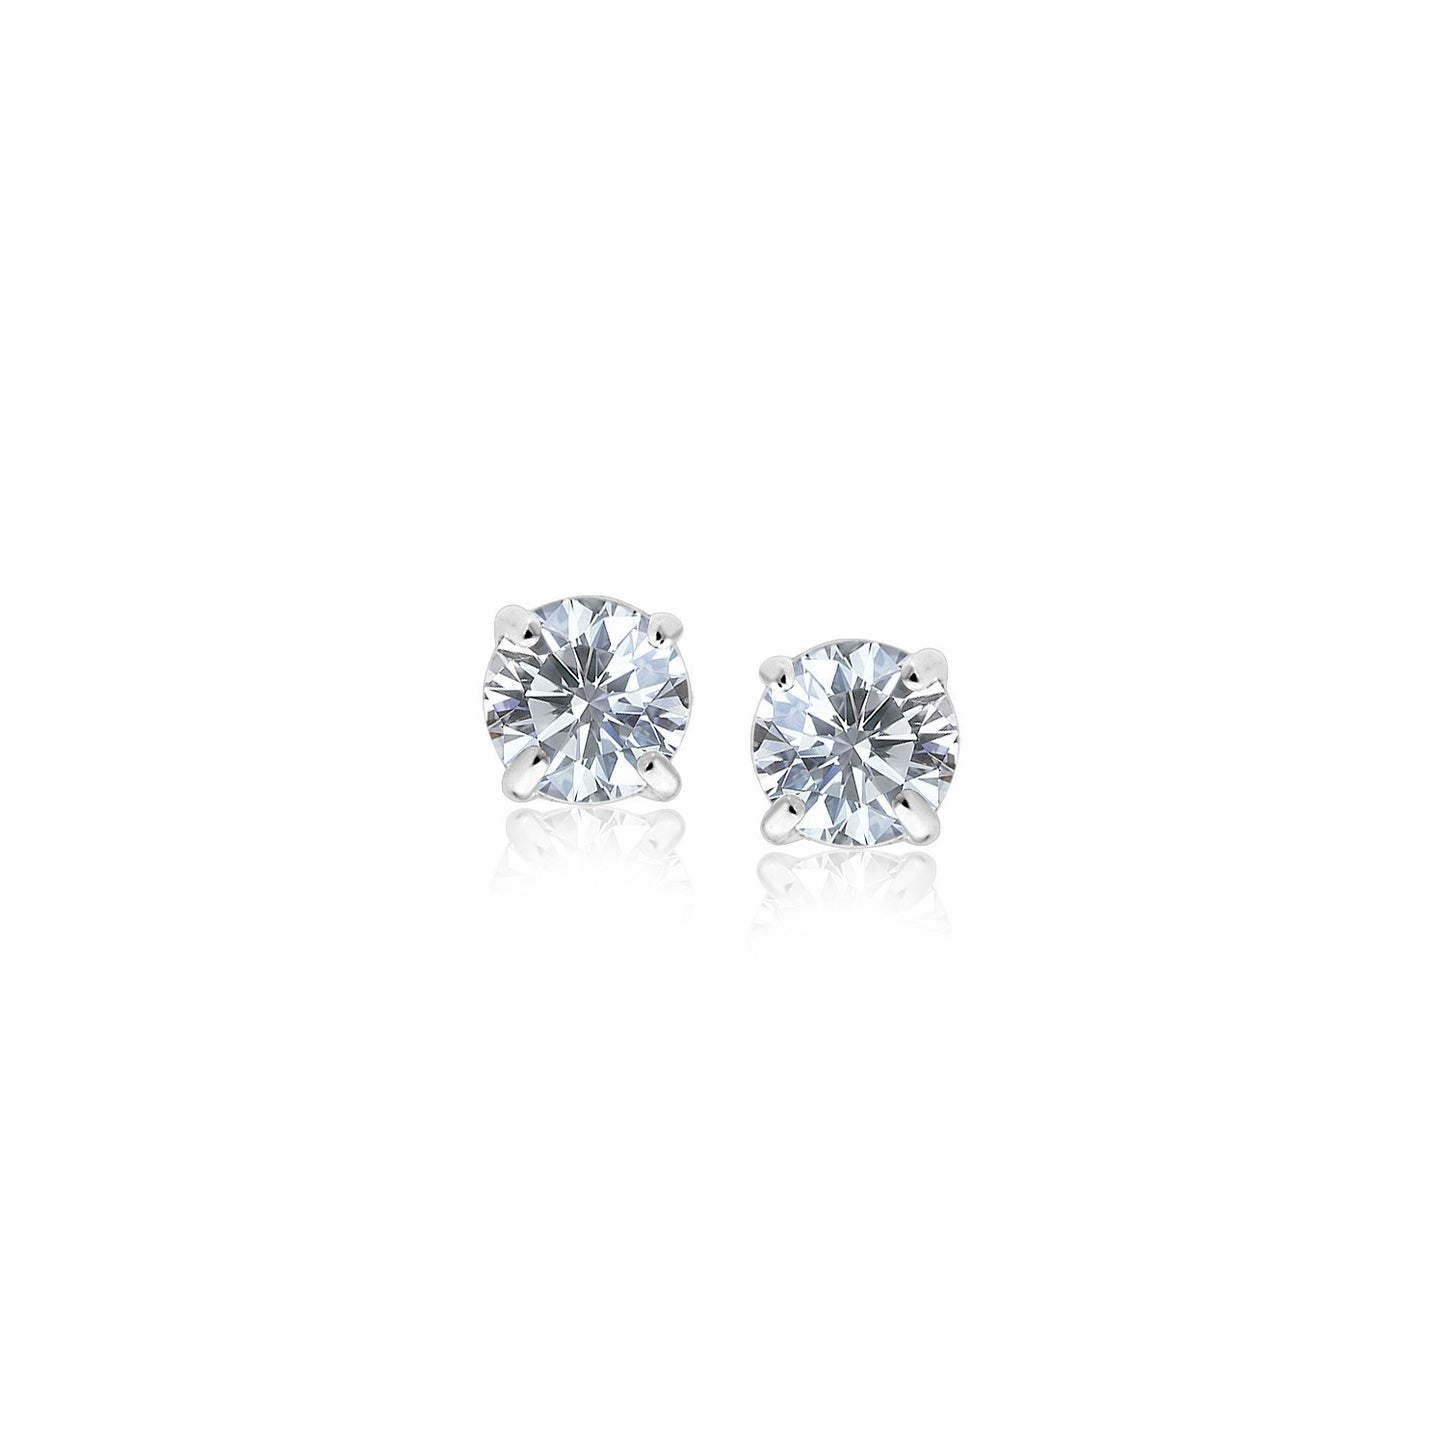 Sterling Silver 3mm Stud Earrings with White Hue Faceted Cubic Zirconia